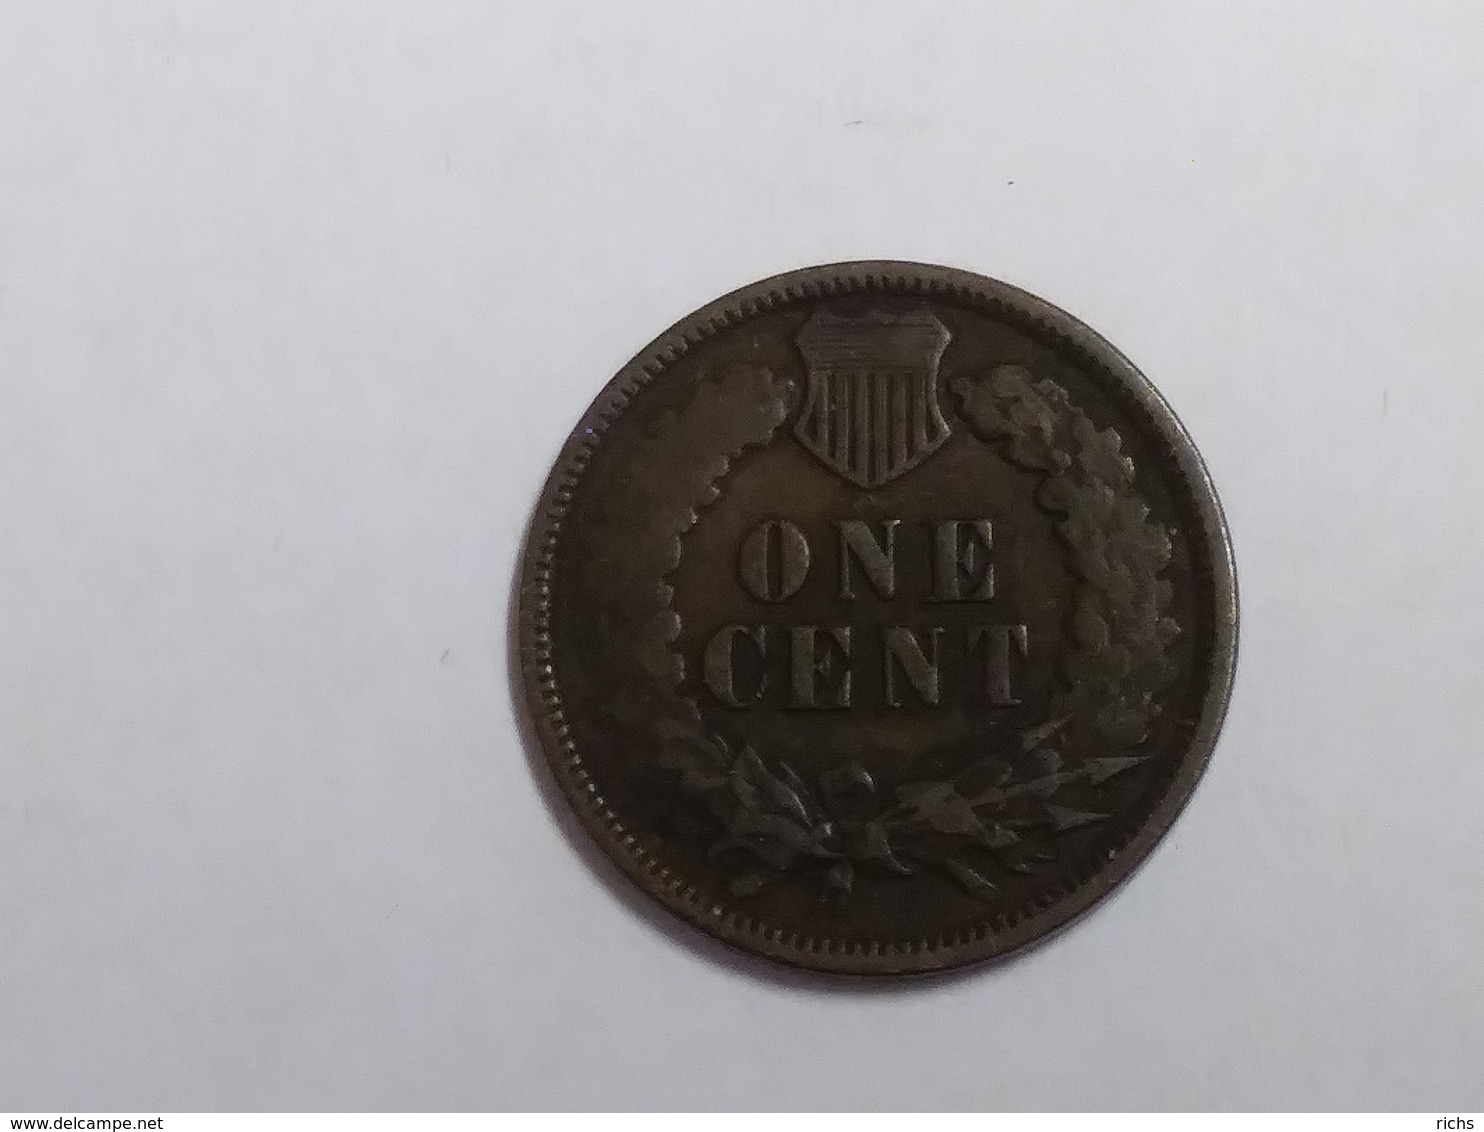 1888 Indian Head Cent - 1859-1909: Indian Head